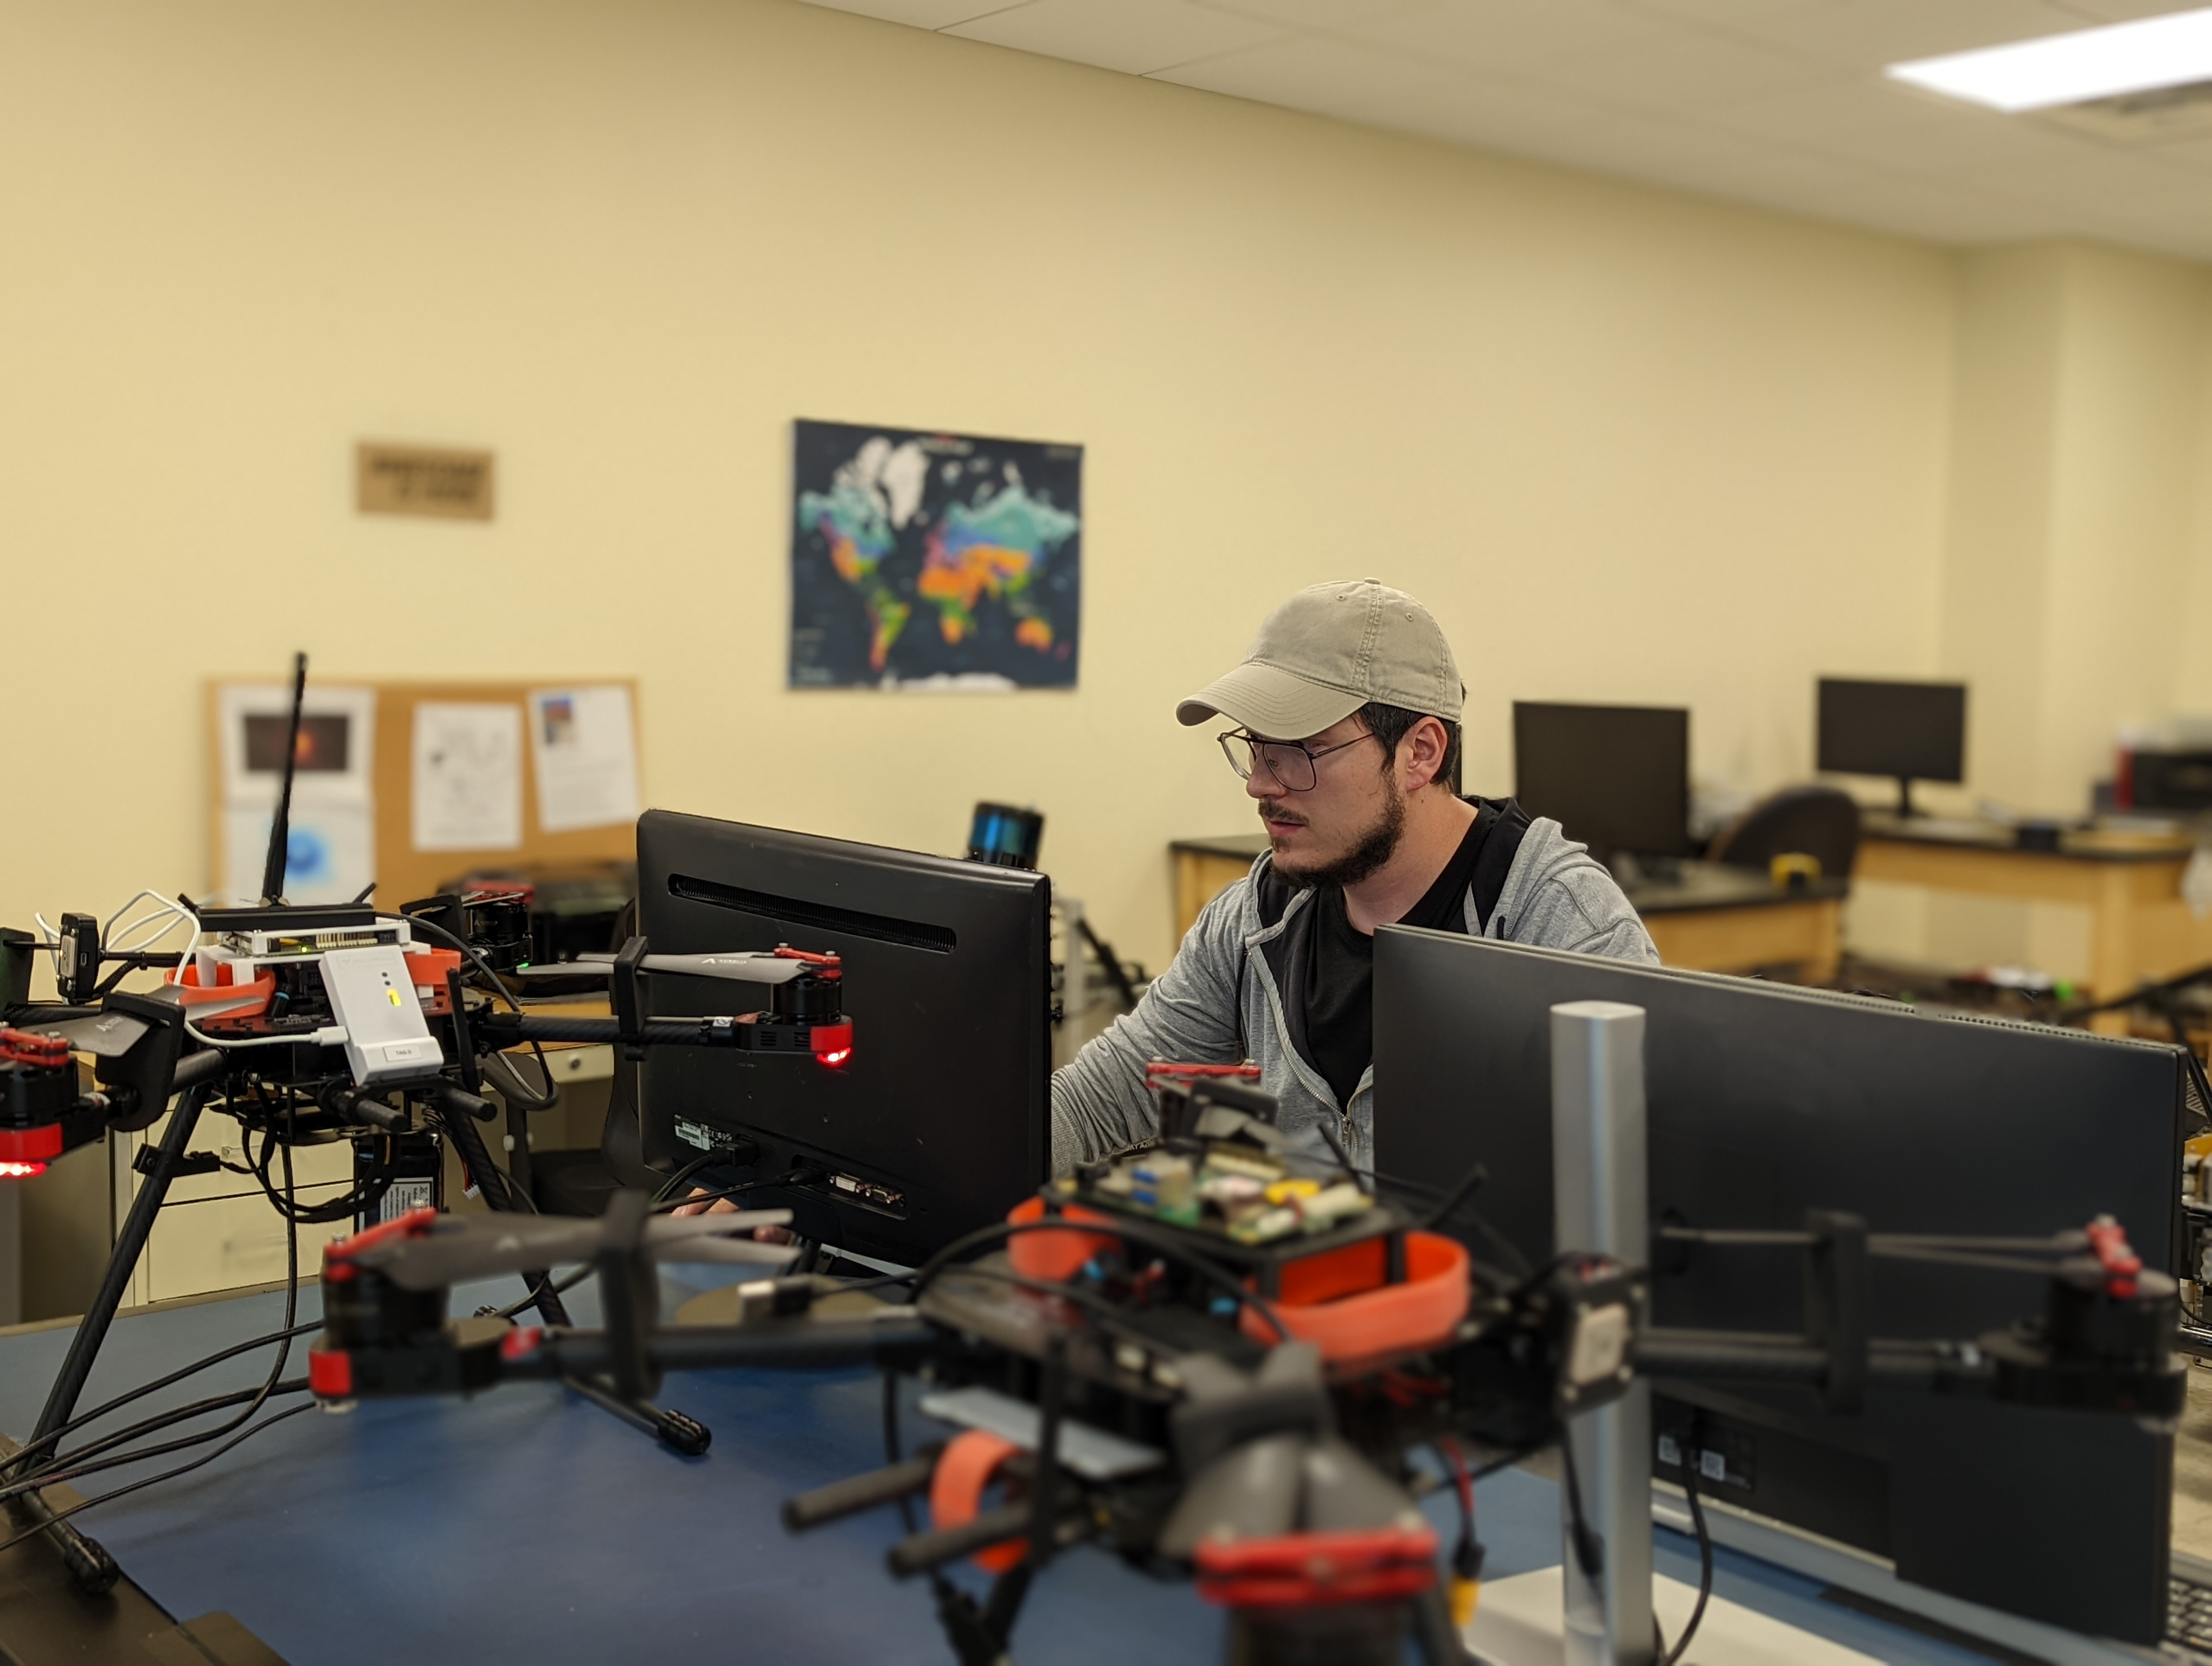 Student working with computer and drone.